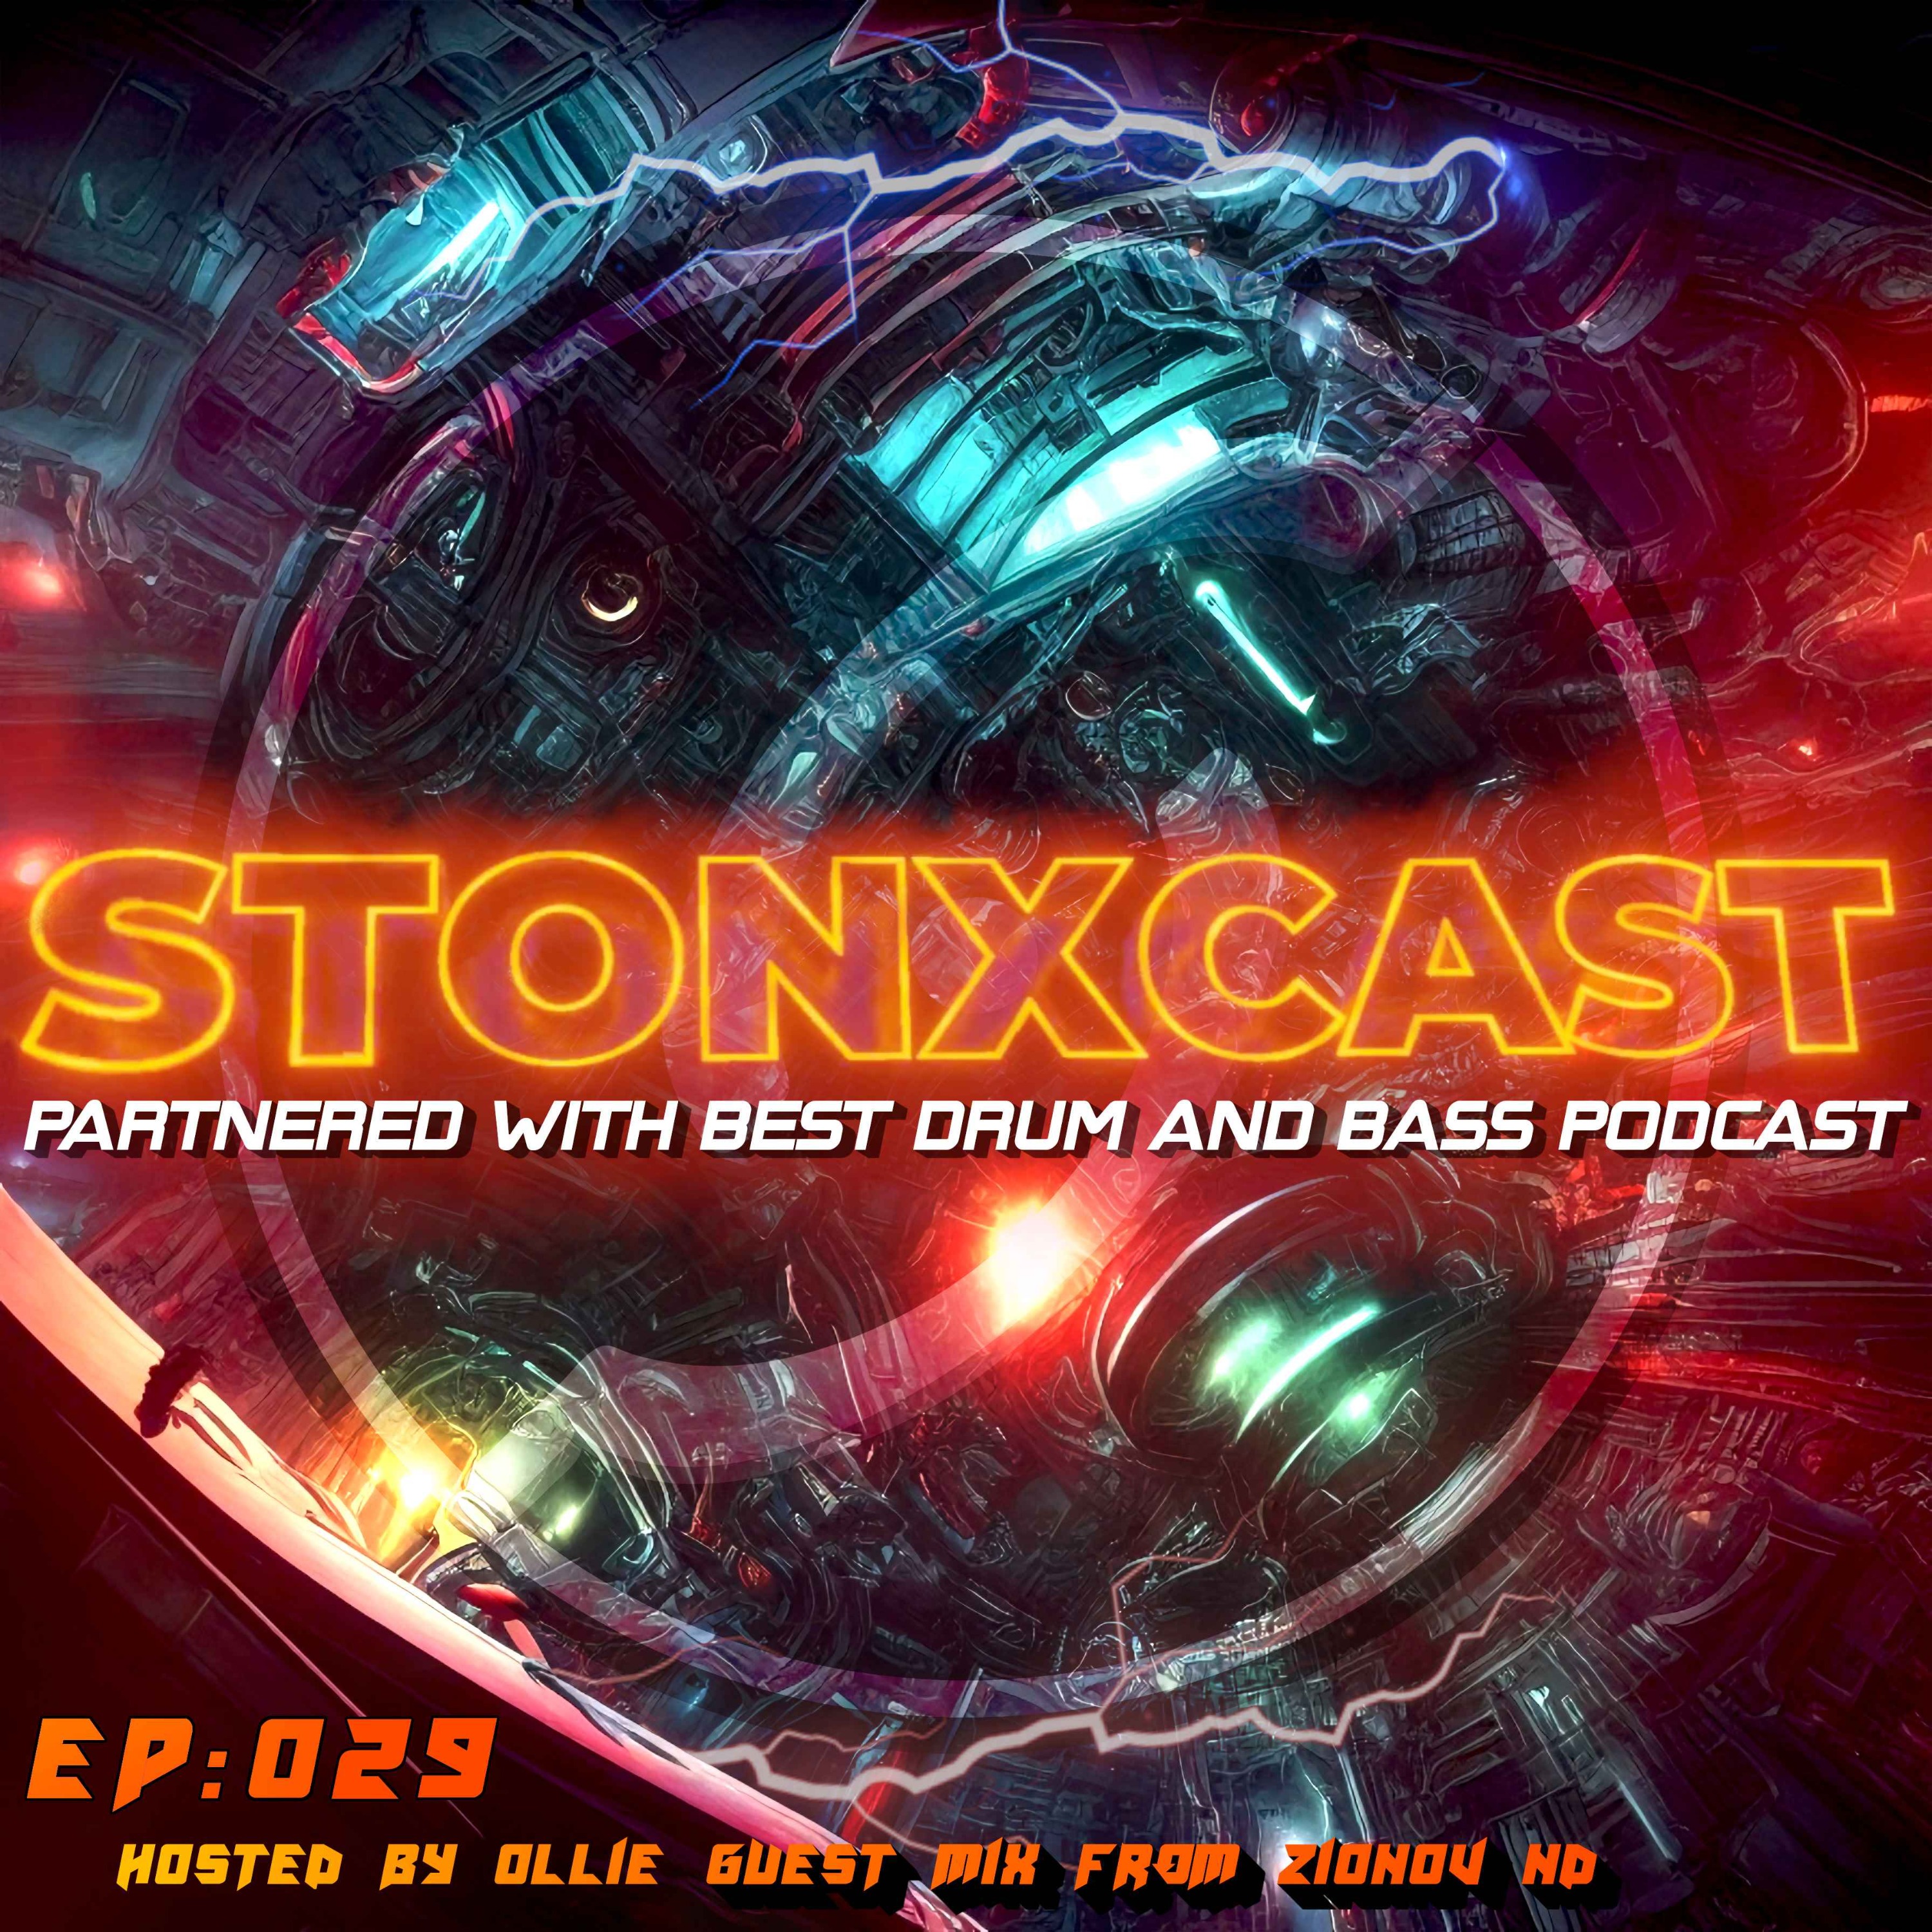 Stonxcast EP:029 - Hosted by Ollie guest mix from Zionov ND Artwork